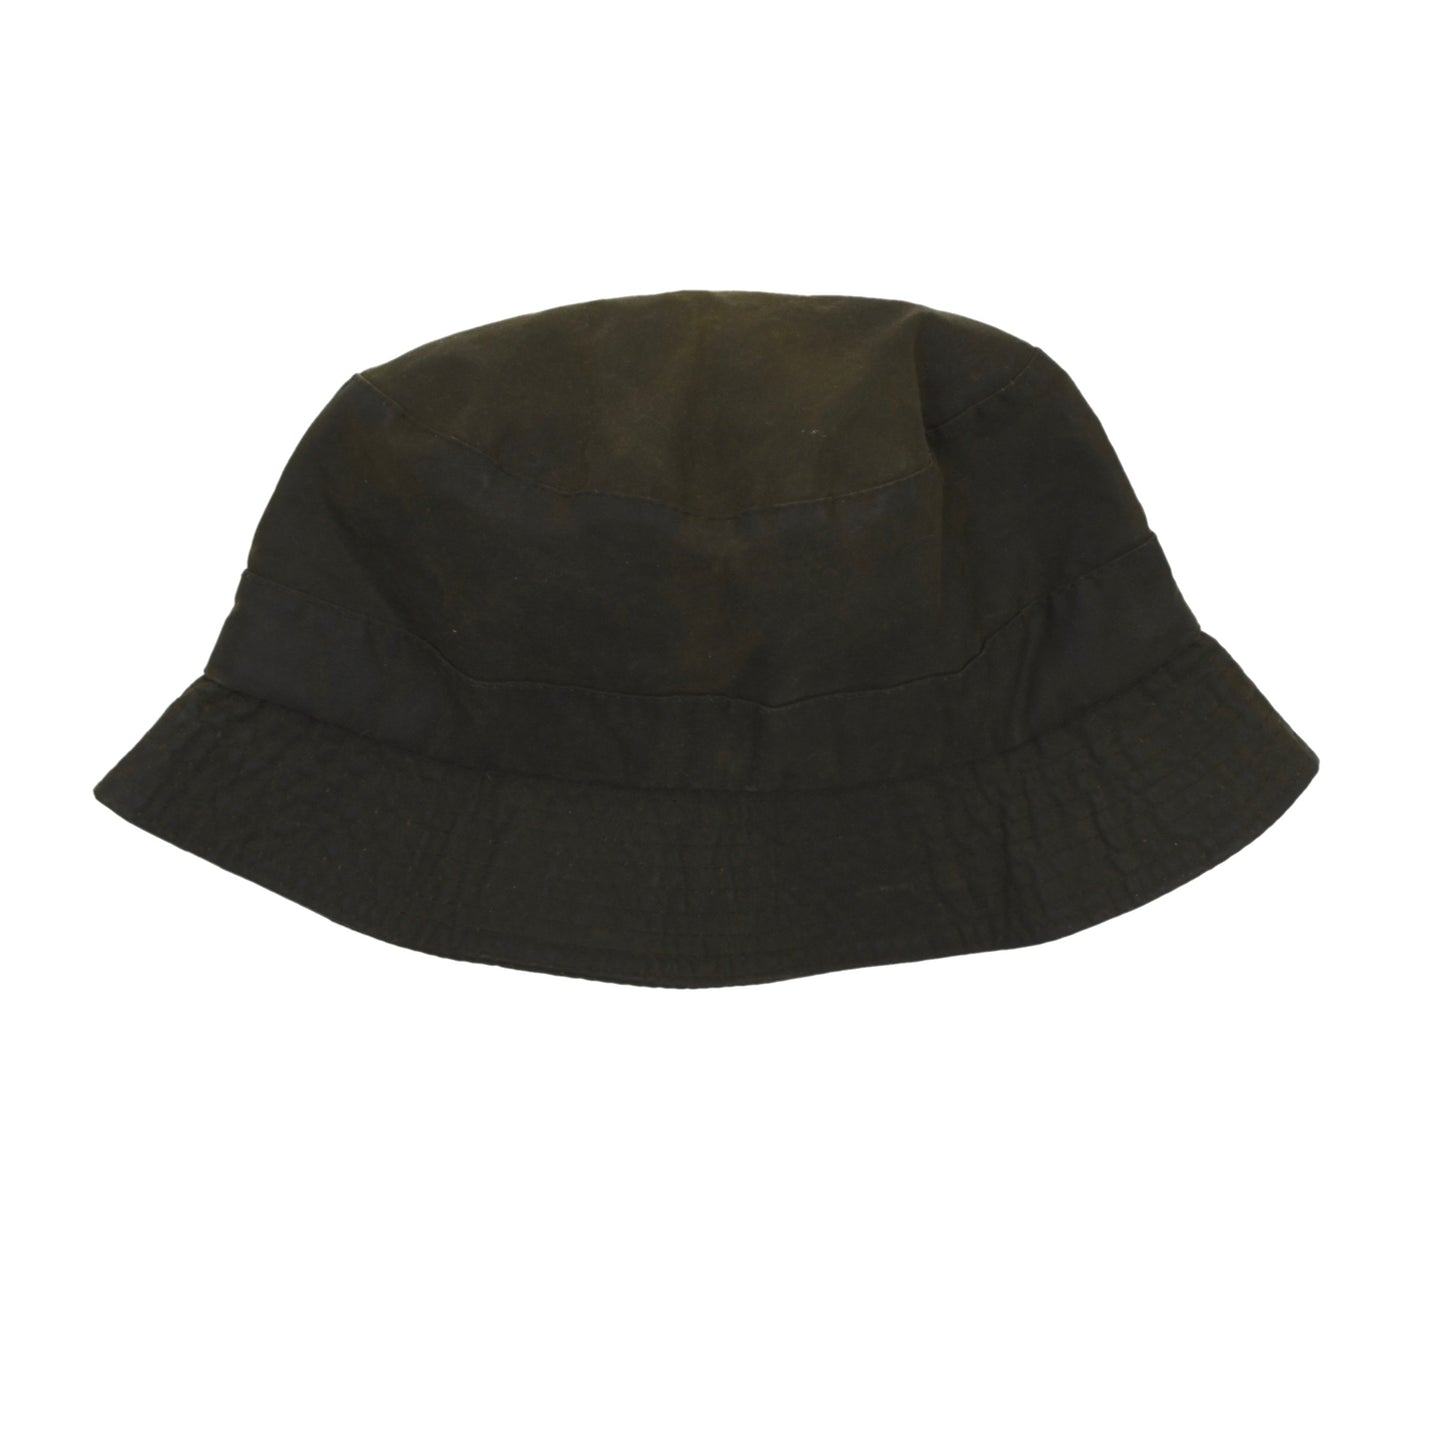 Barbour A115 Waxed Bucket Hat Size L - Sage Green